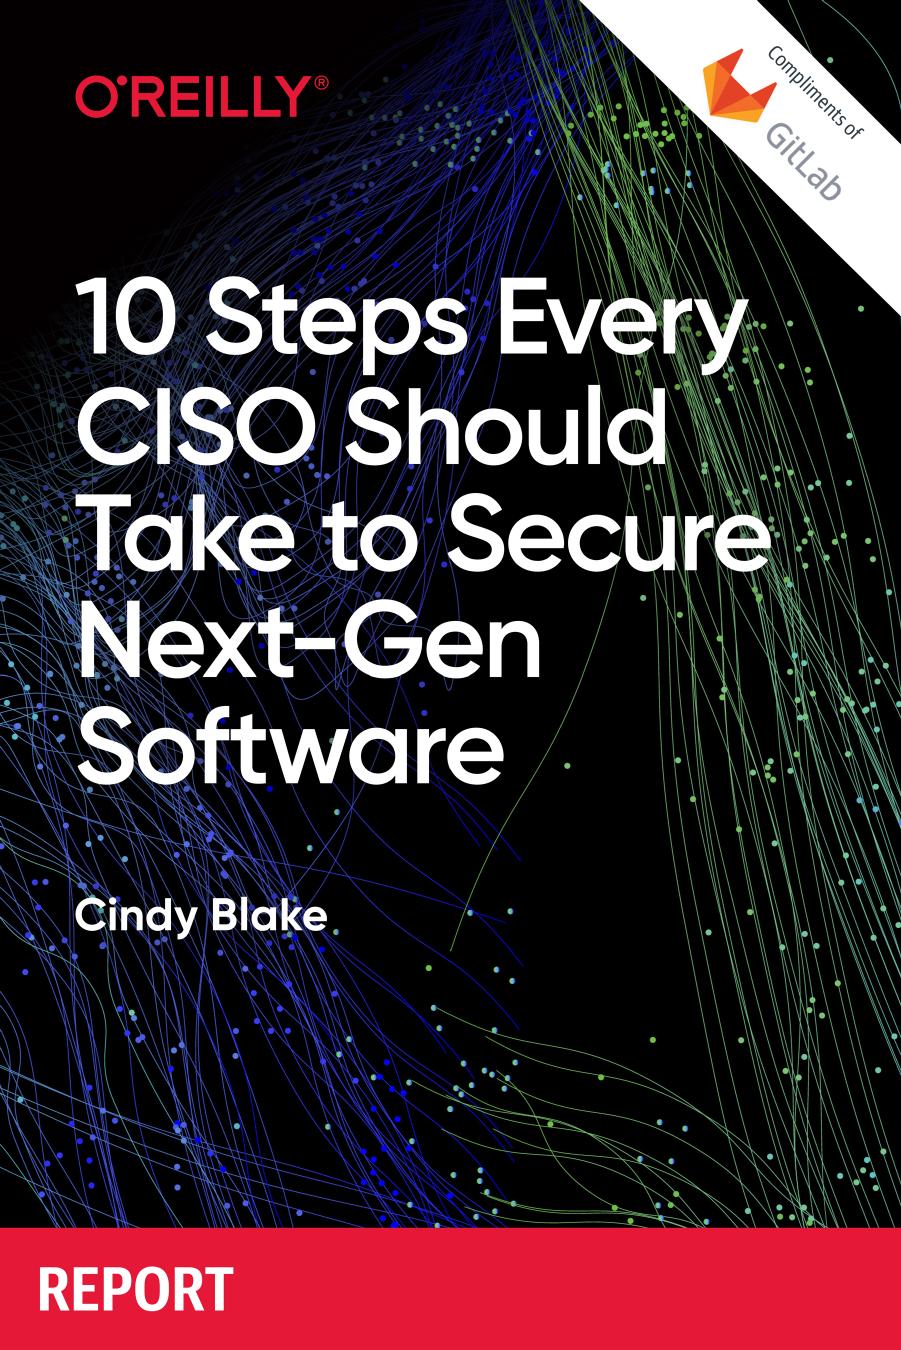 10 Steps Every CISO Should Take to Secure Next-Gen Software